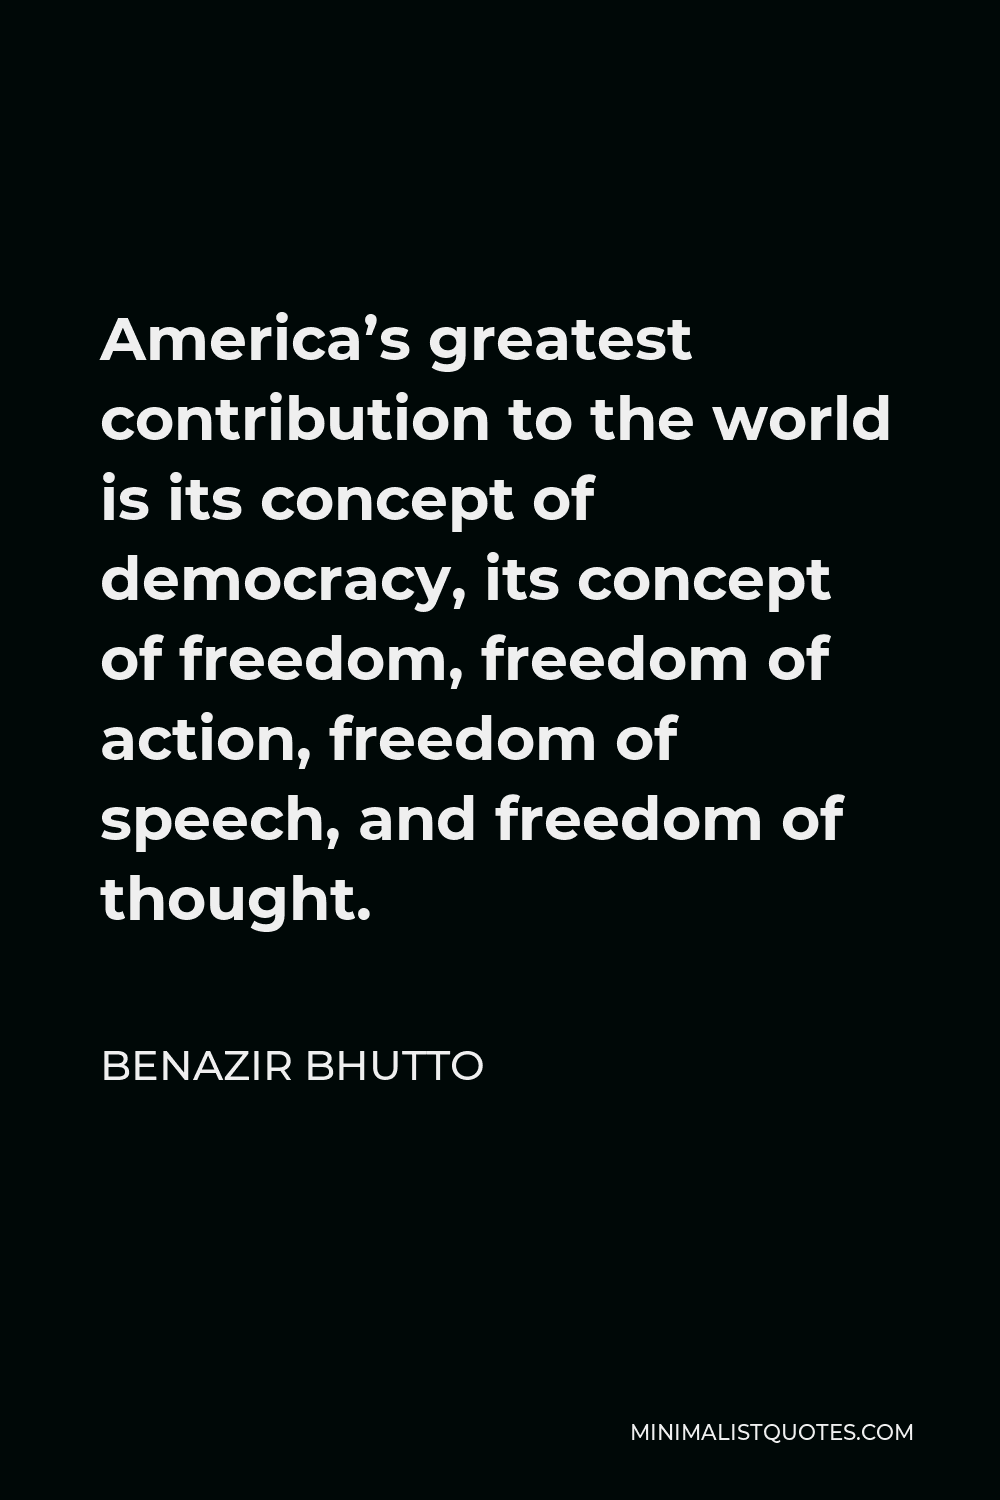 Benazir Bhutto Quote - America’s greatest contribution to the world is its concept of democracy, its concept of freedom, freedom of action, freedom of speech, and freedom of thought.